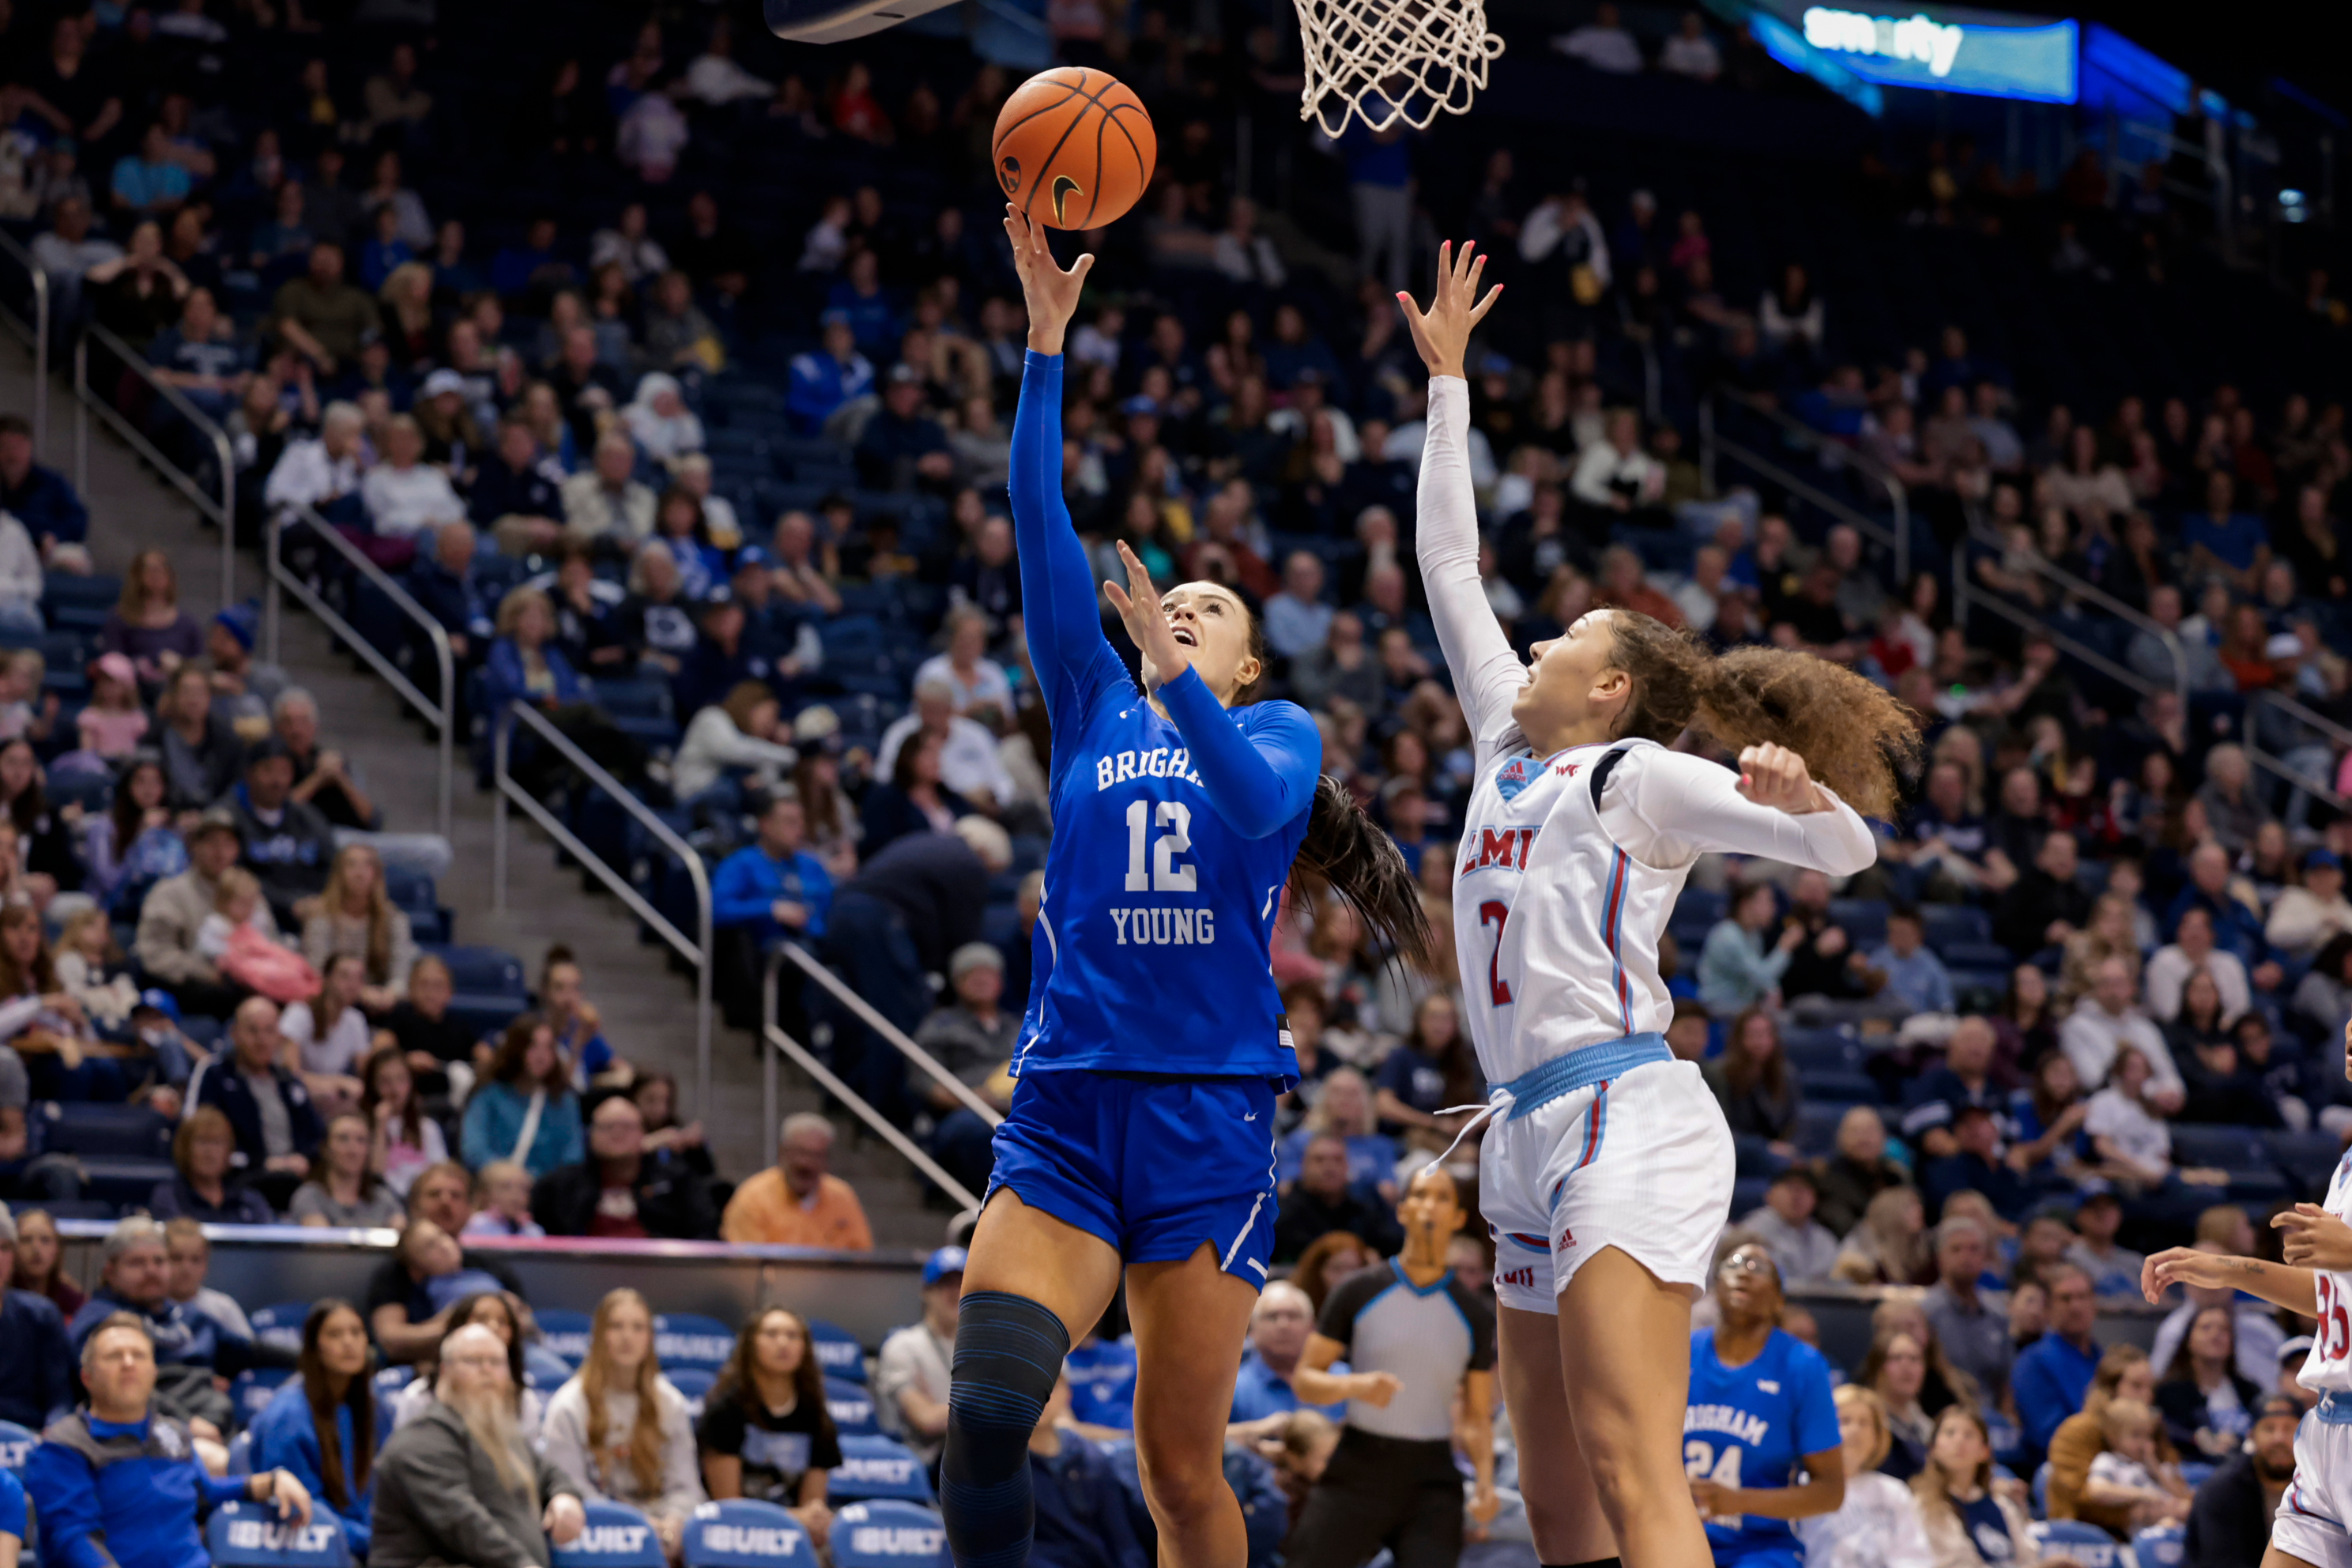 Lauren Gustin led the Cougars in a win over LMU at the Marriott Center.